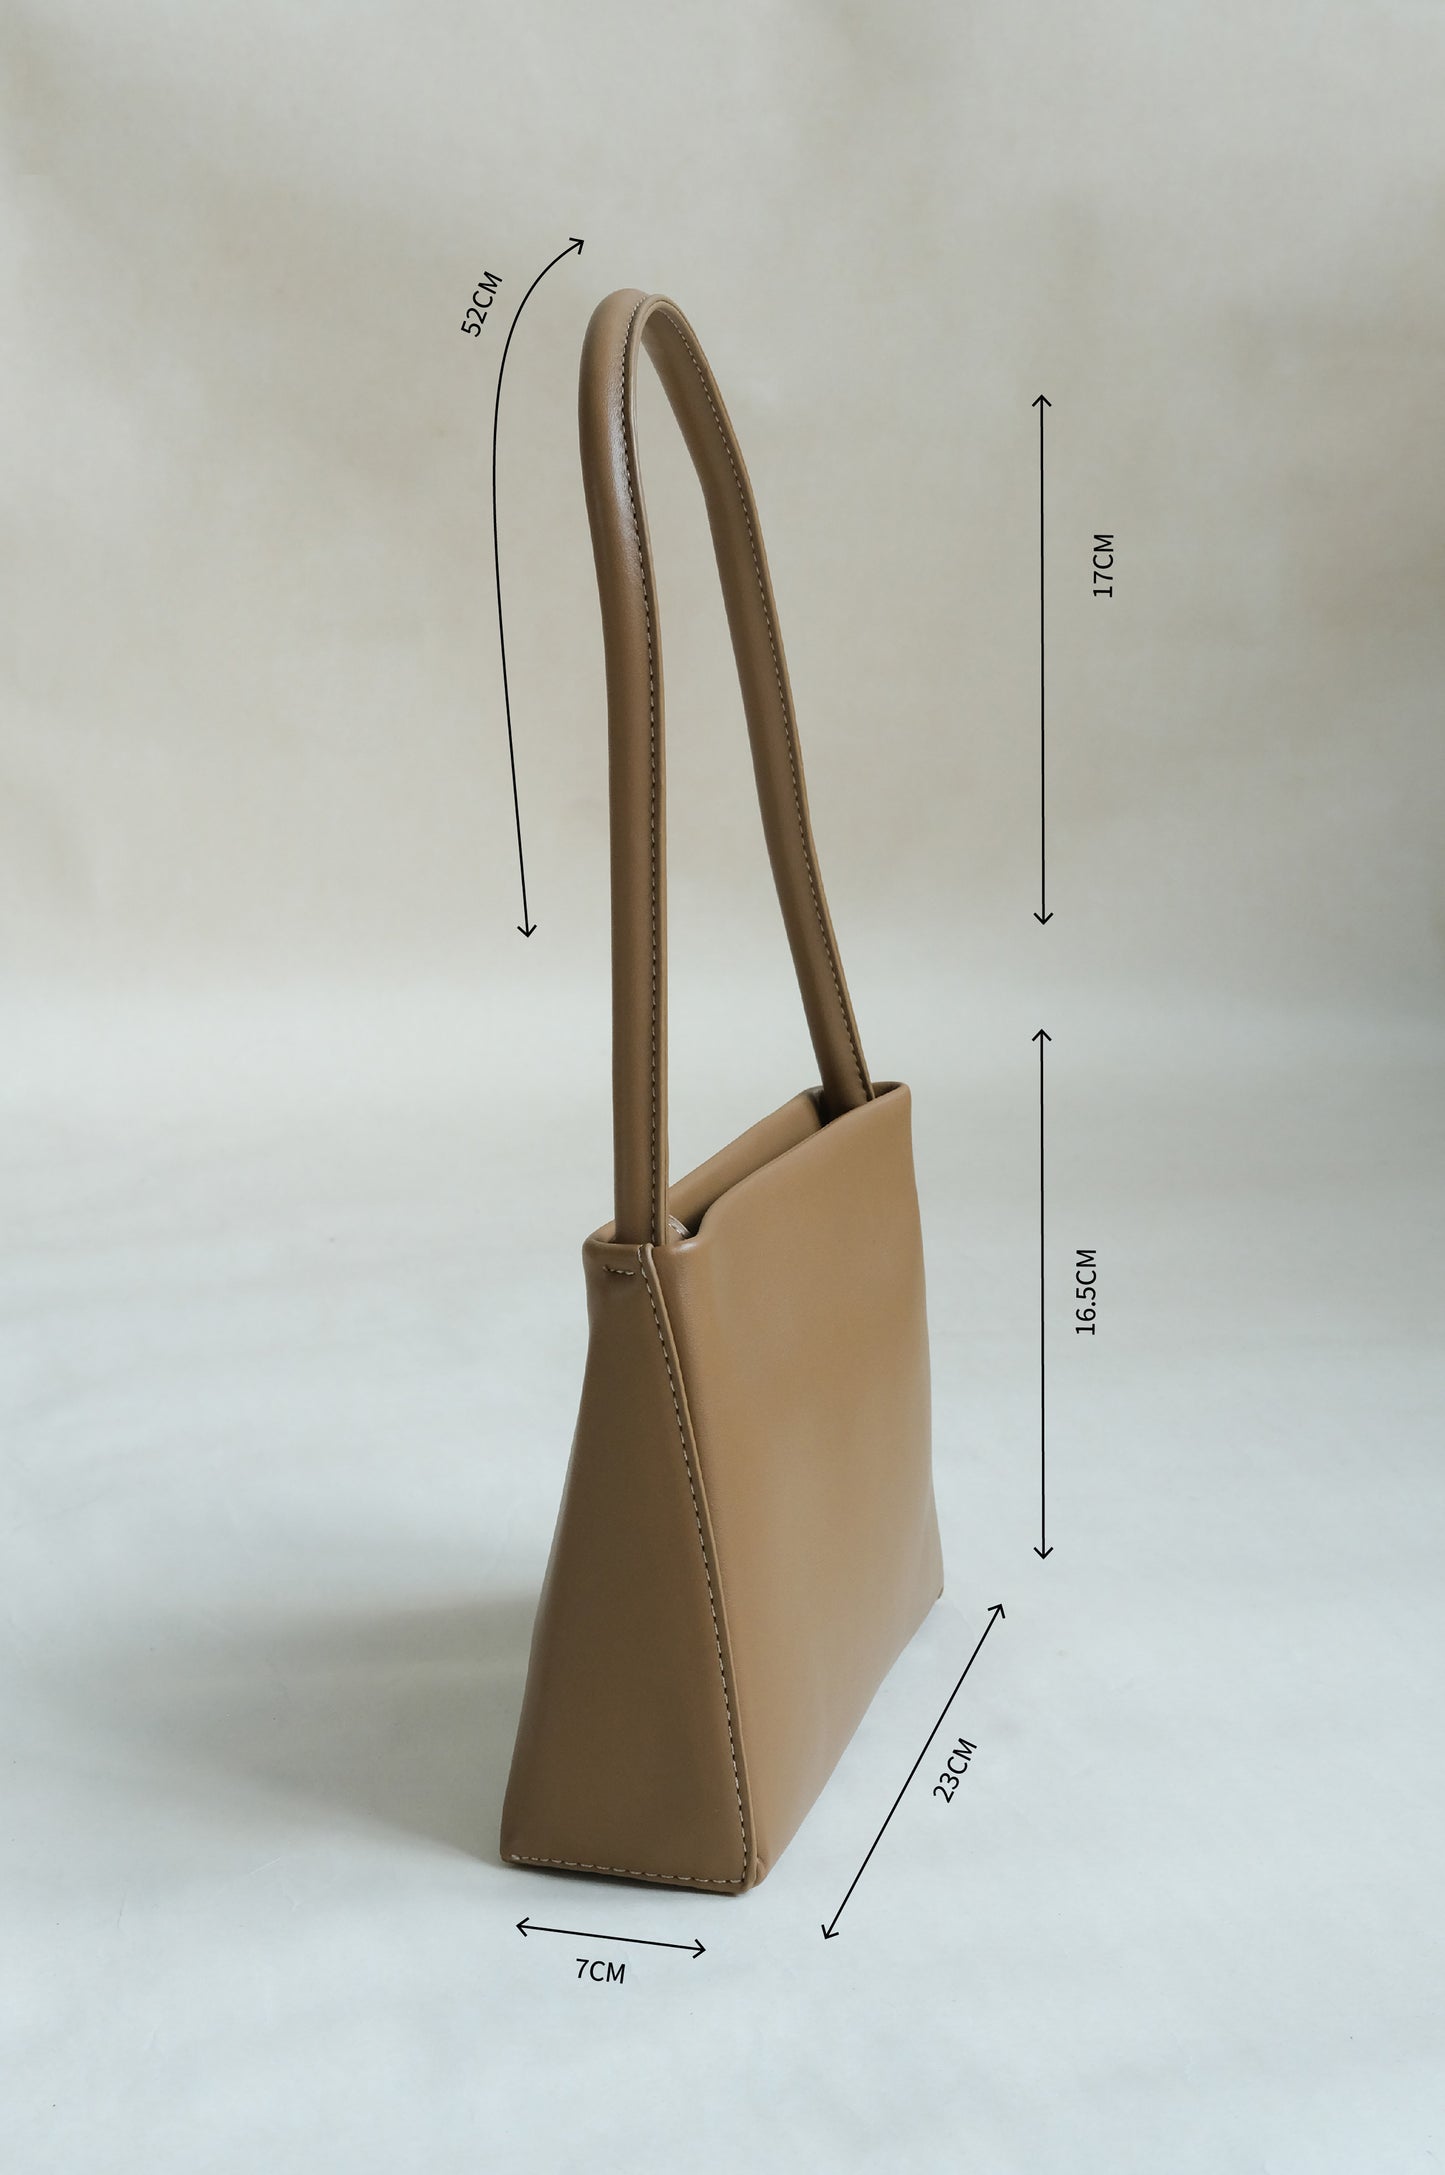 Square tote bag with one shoulder under the armpits in brown